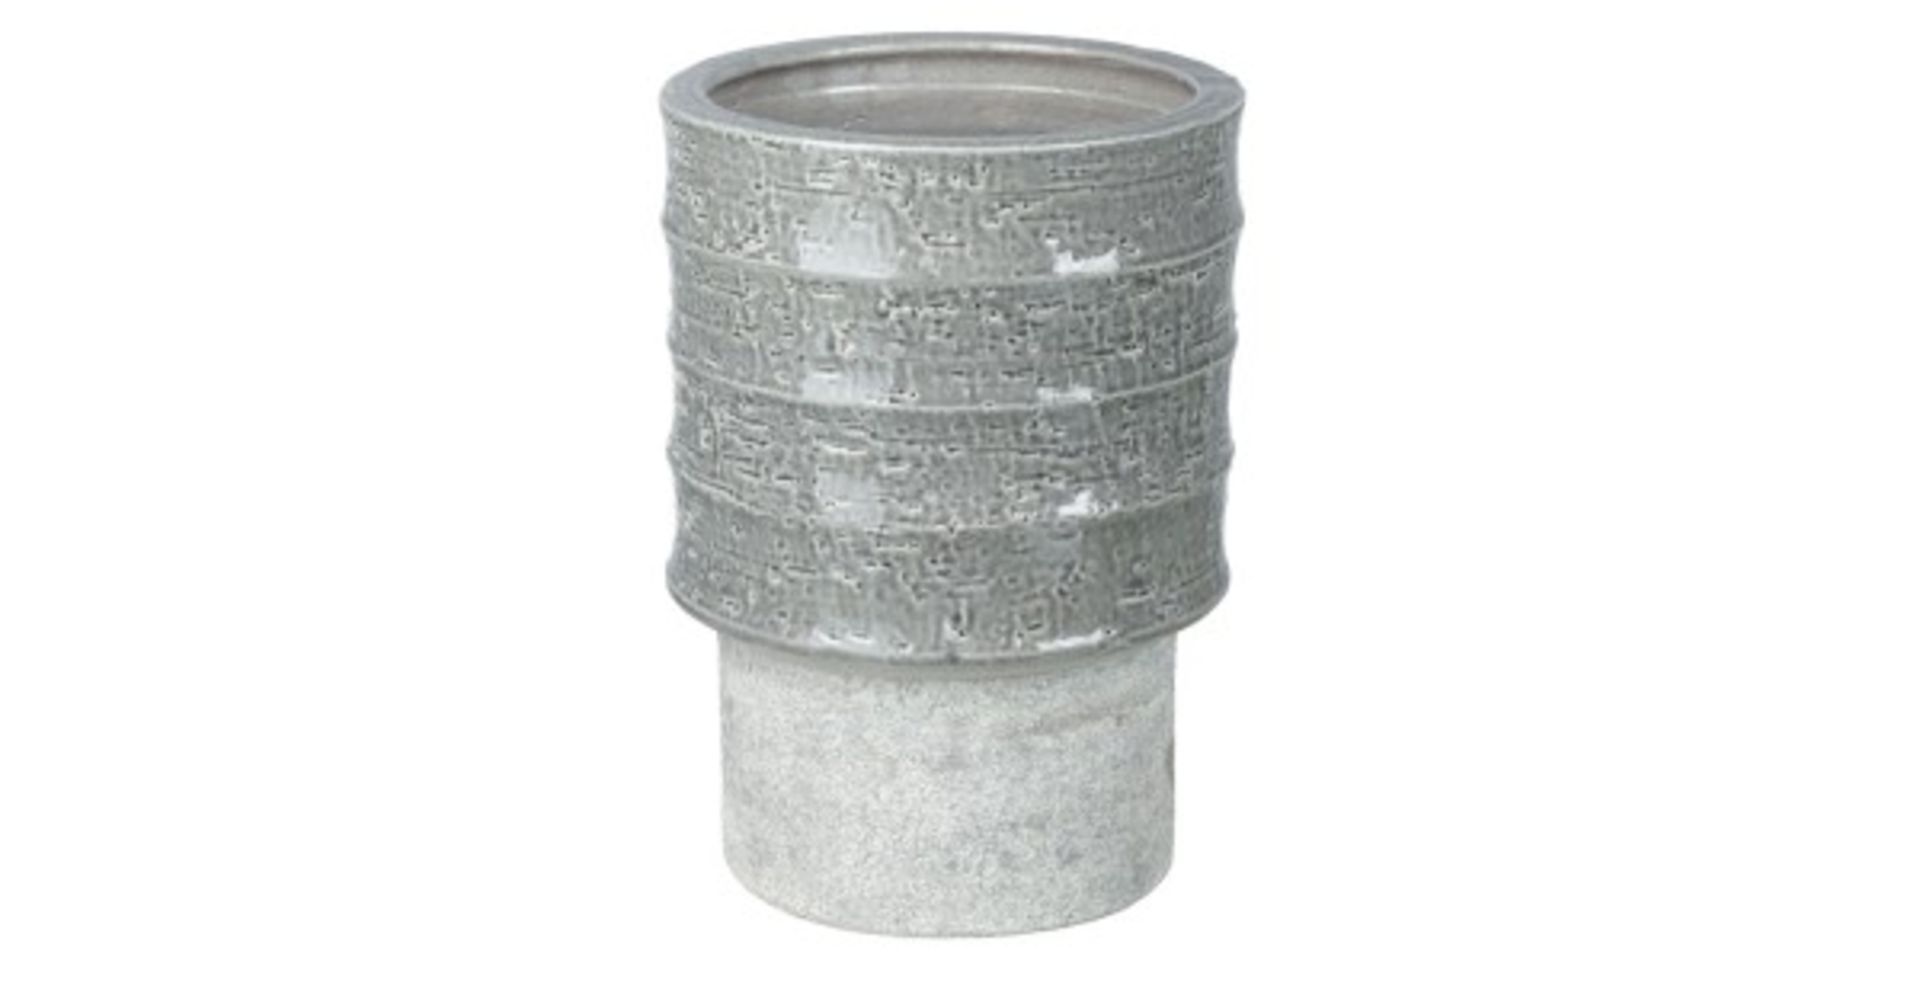 Ripple planter Grey 200x280mmh Brand New Parlane Accessories We take our product seriously and